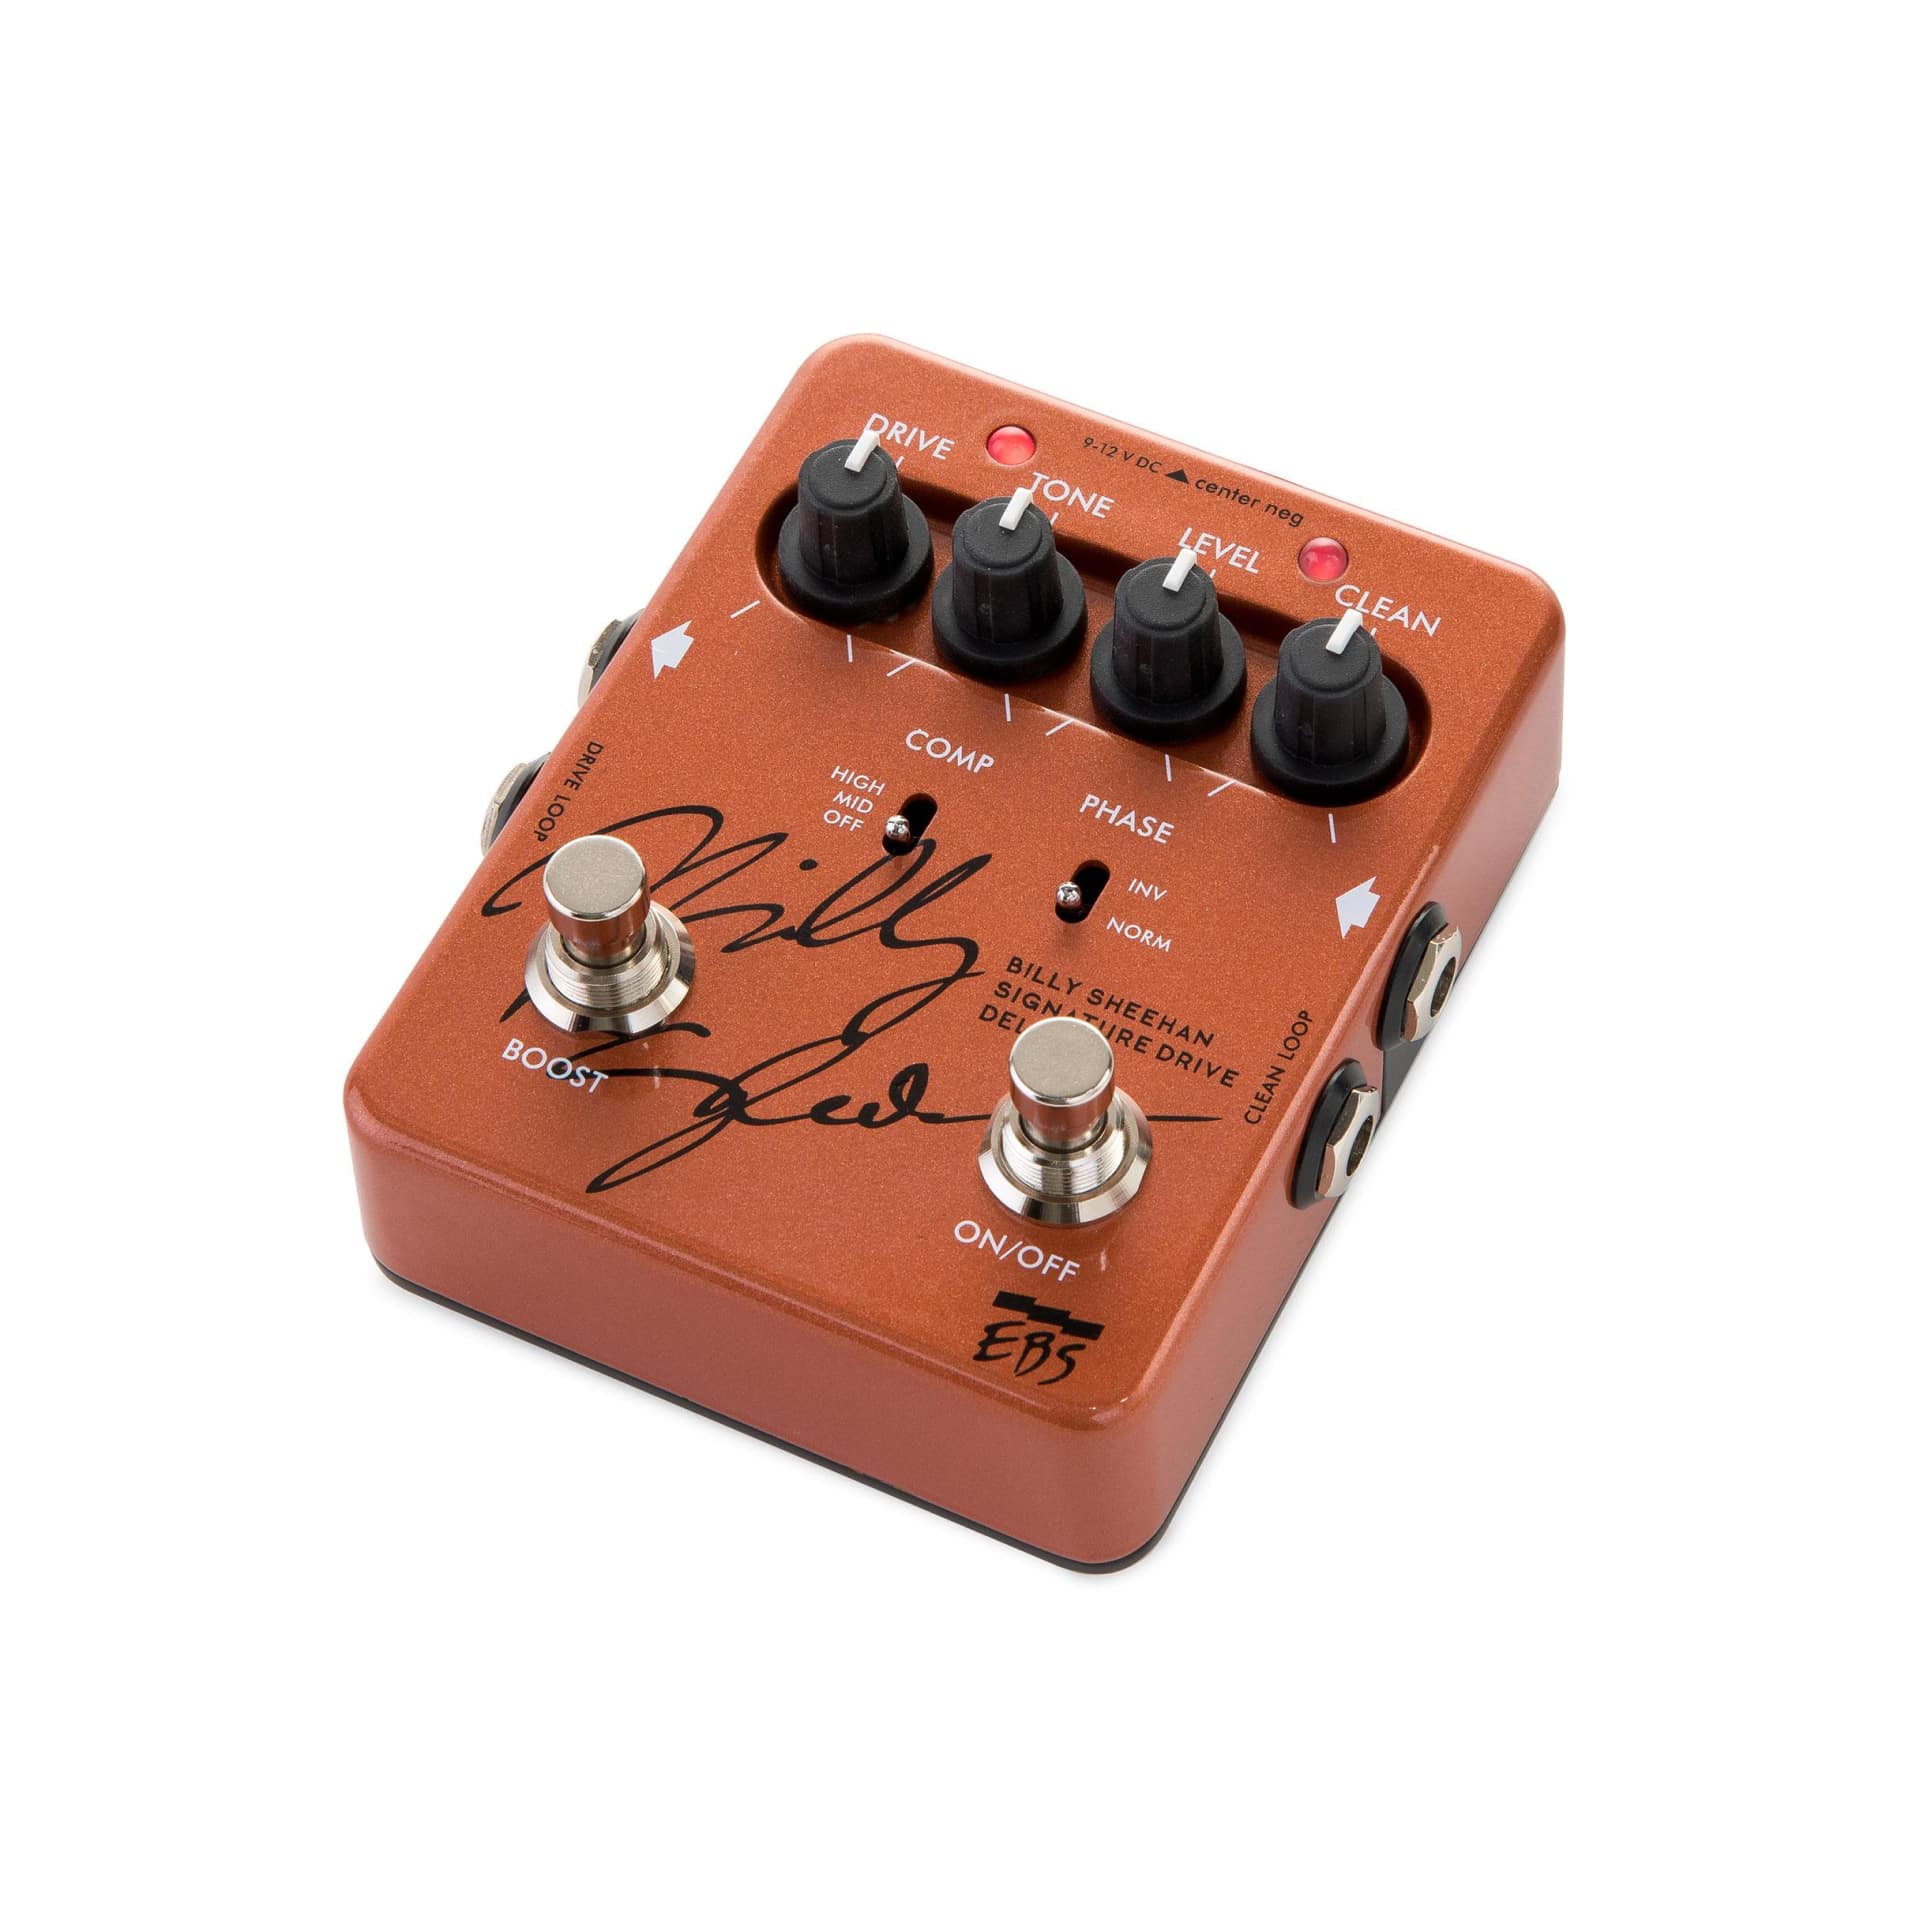 Billy Sheehan Signature Drive Deluxe B-Stock